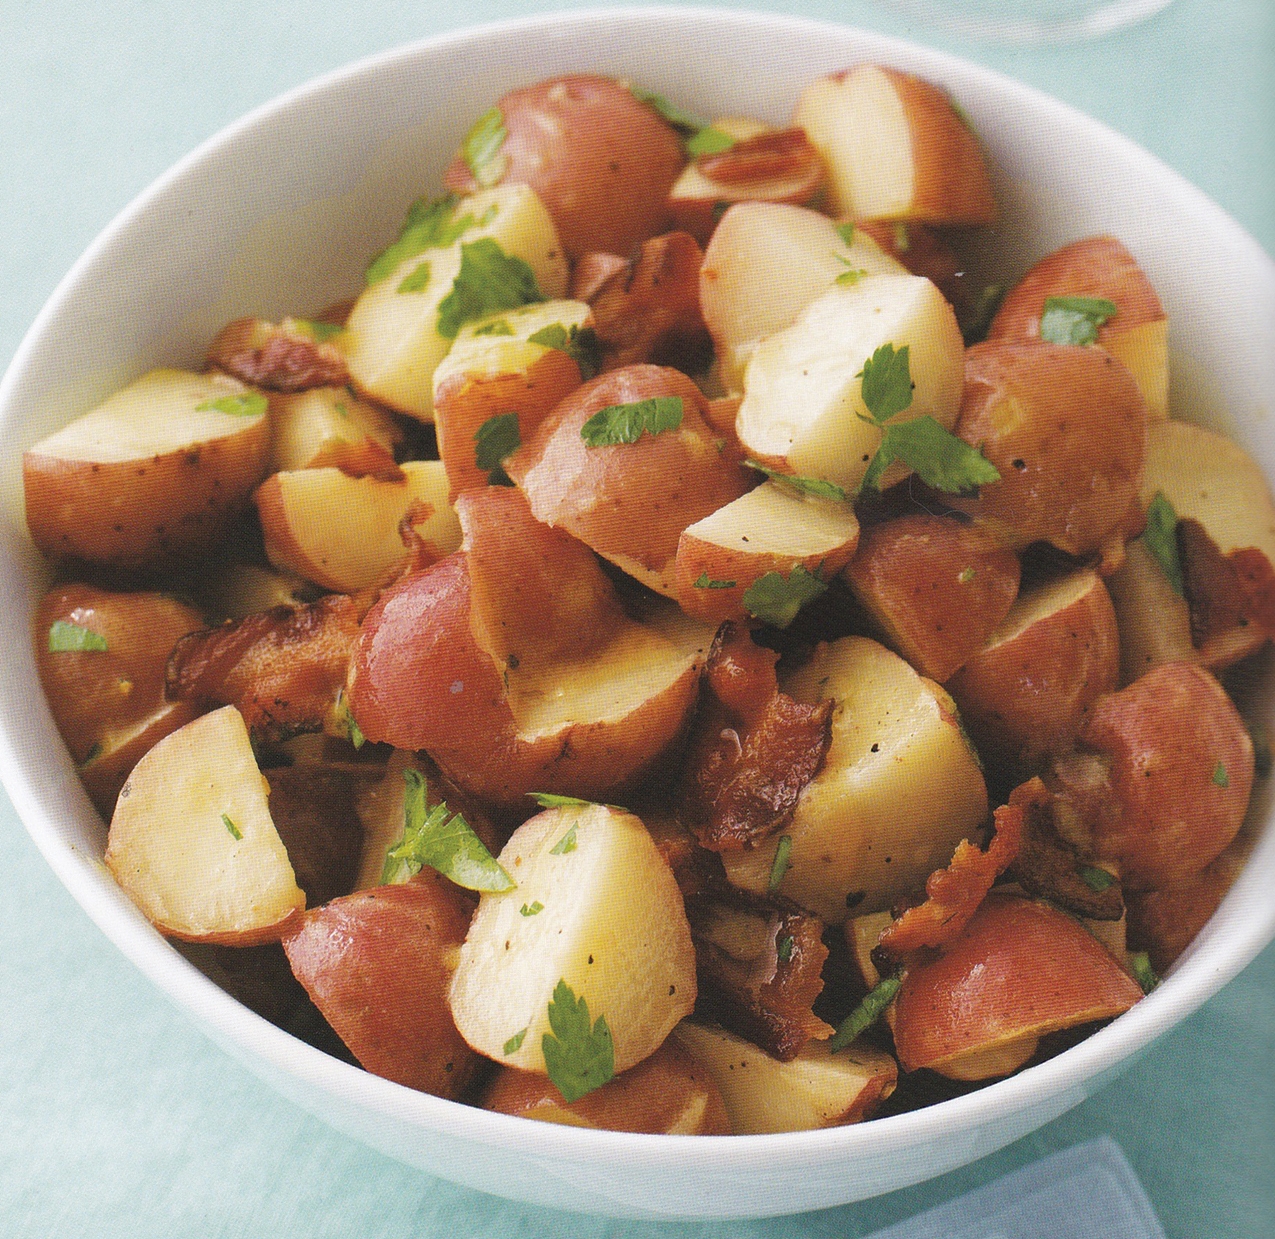 Potato Salad with Bacon and Parsley